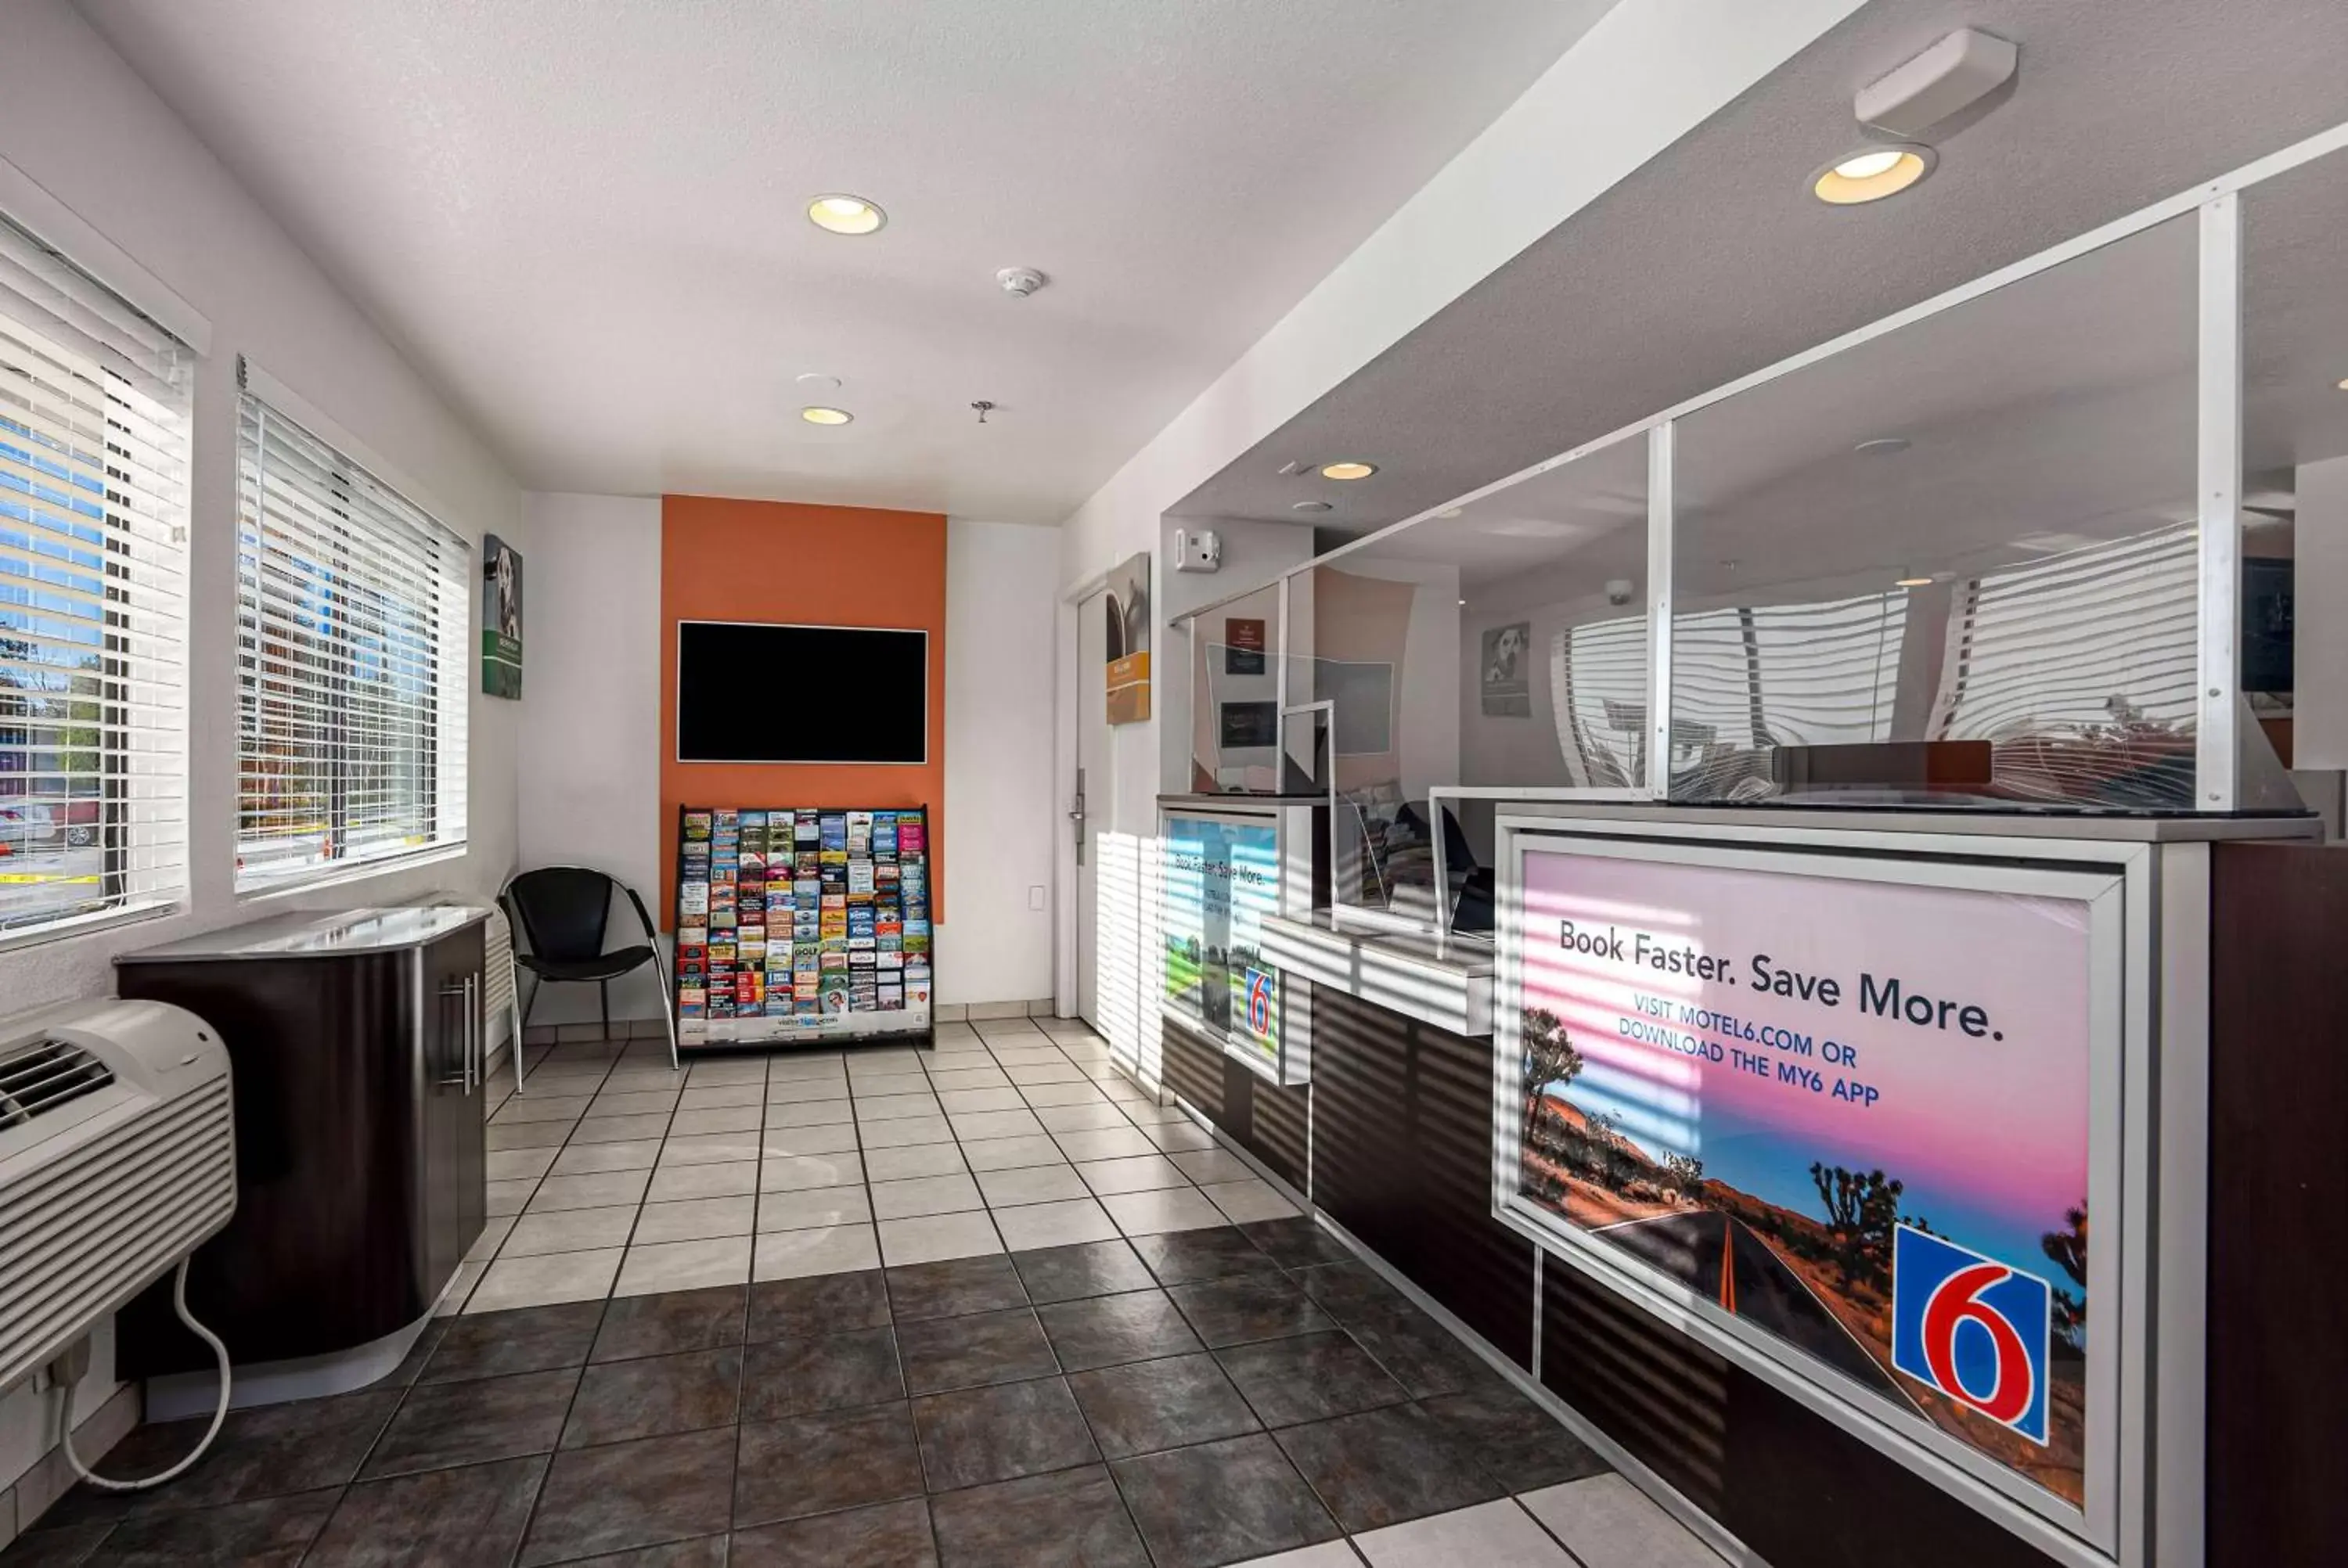 Lobby or reception in Motel 6-Temecula, CA - Historic Old Town